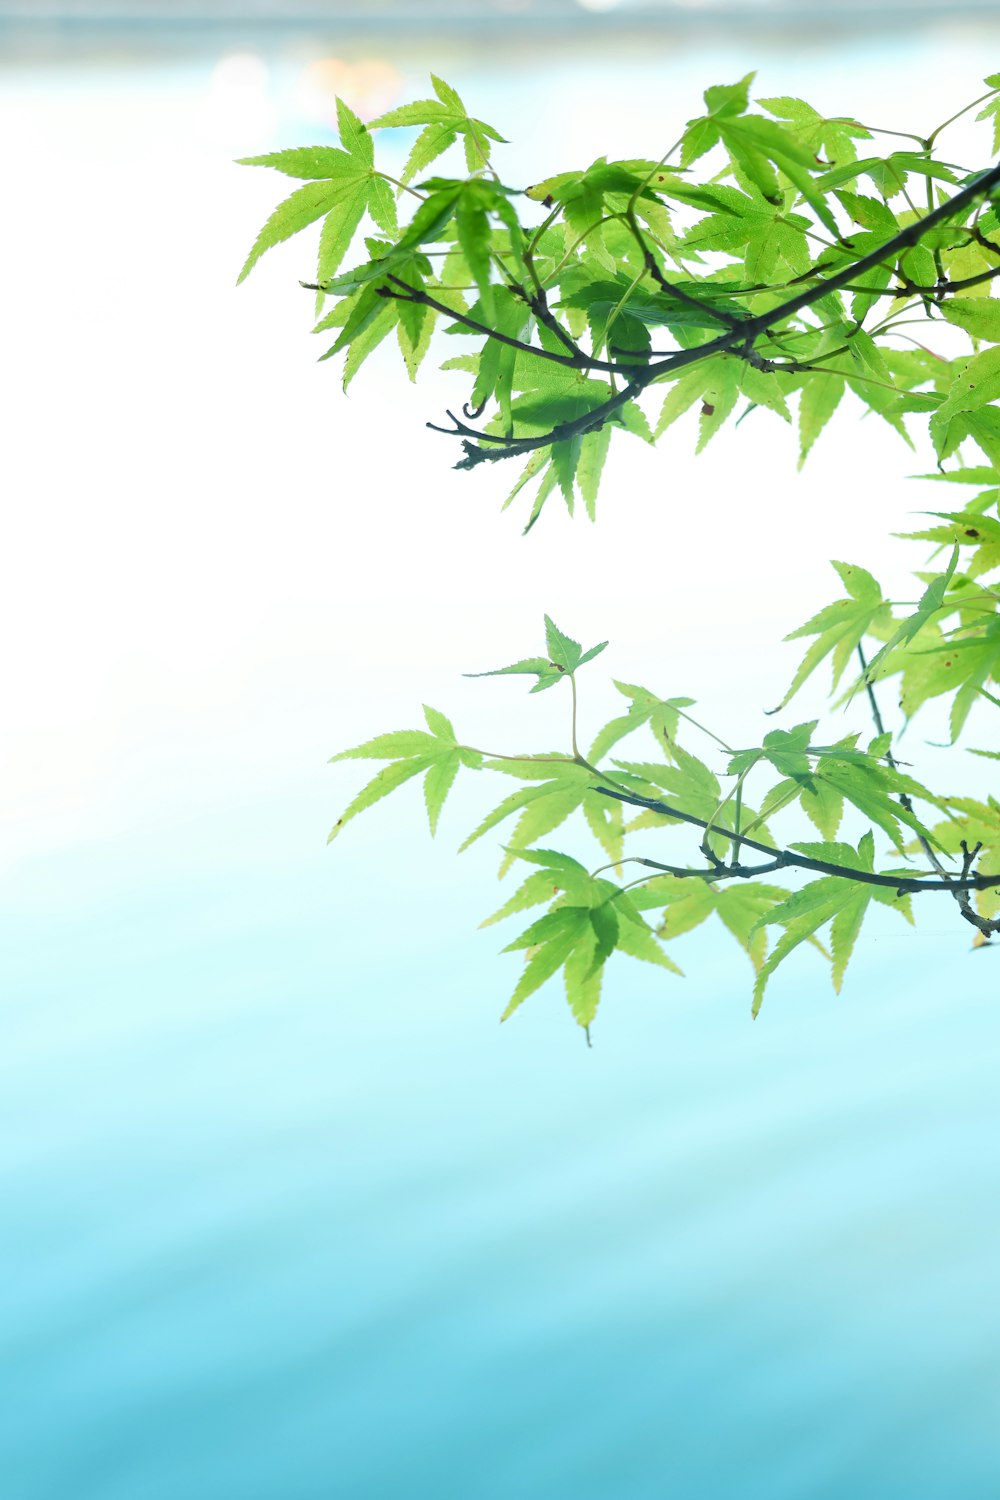 a tree branch with green leaves over a body of water